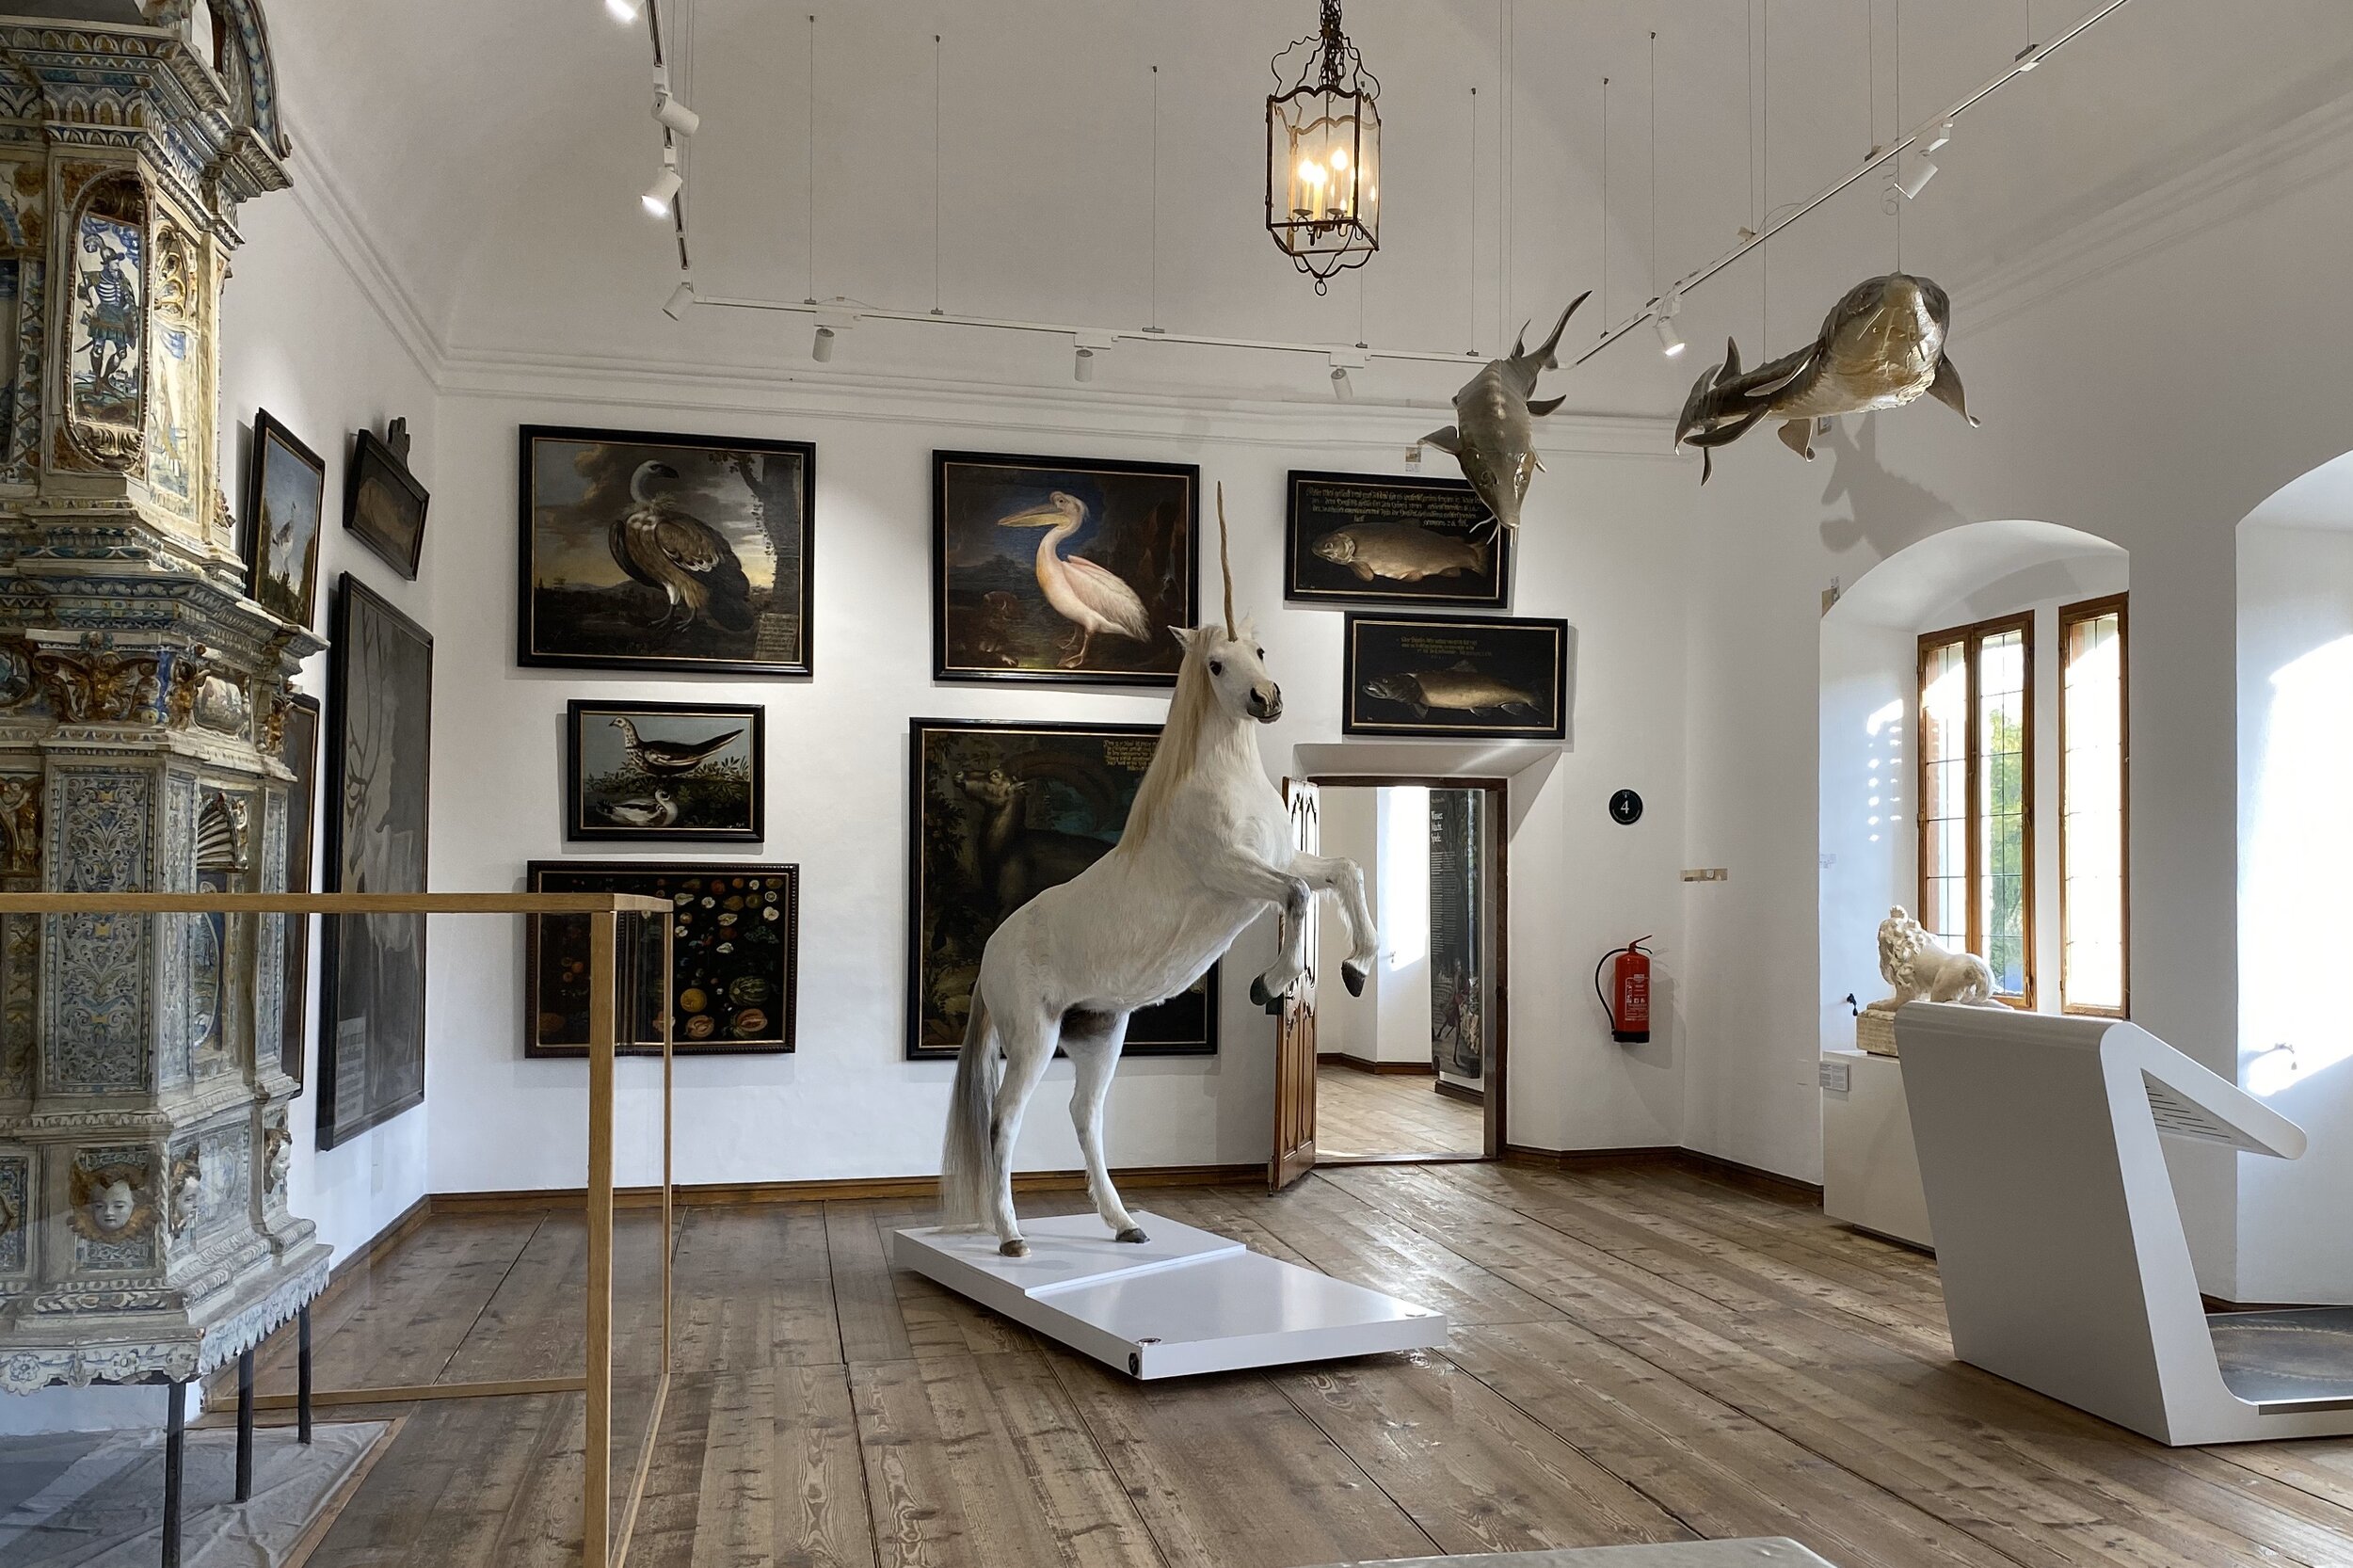  Yeah, that’s a unicorn; a sturgeon hangs from the ceiling 